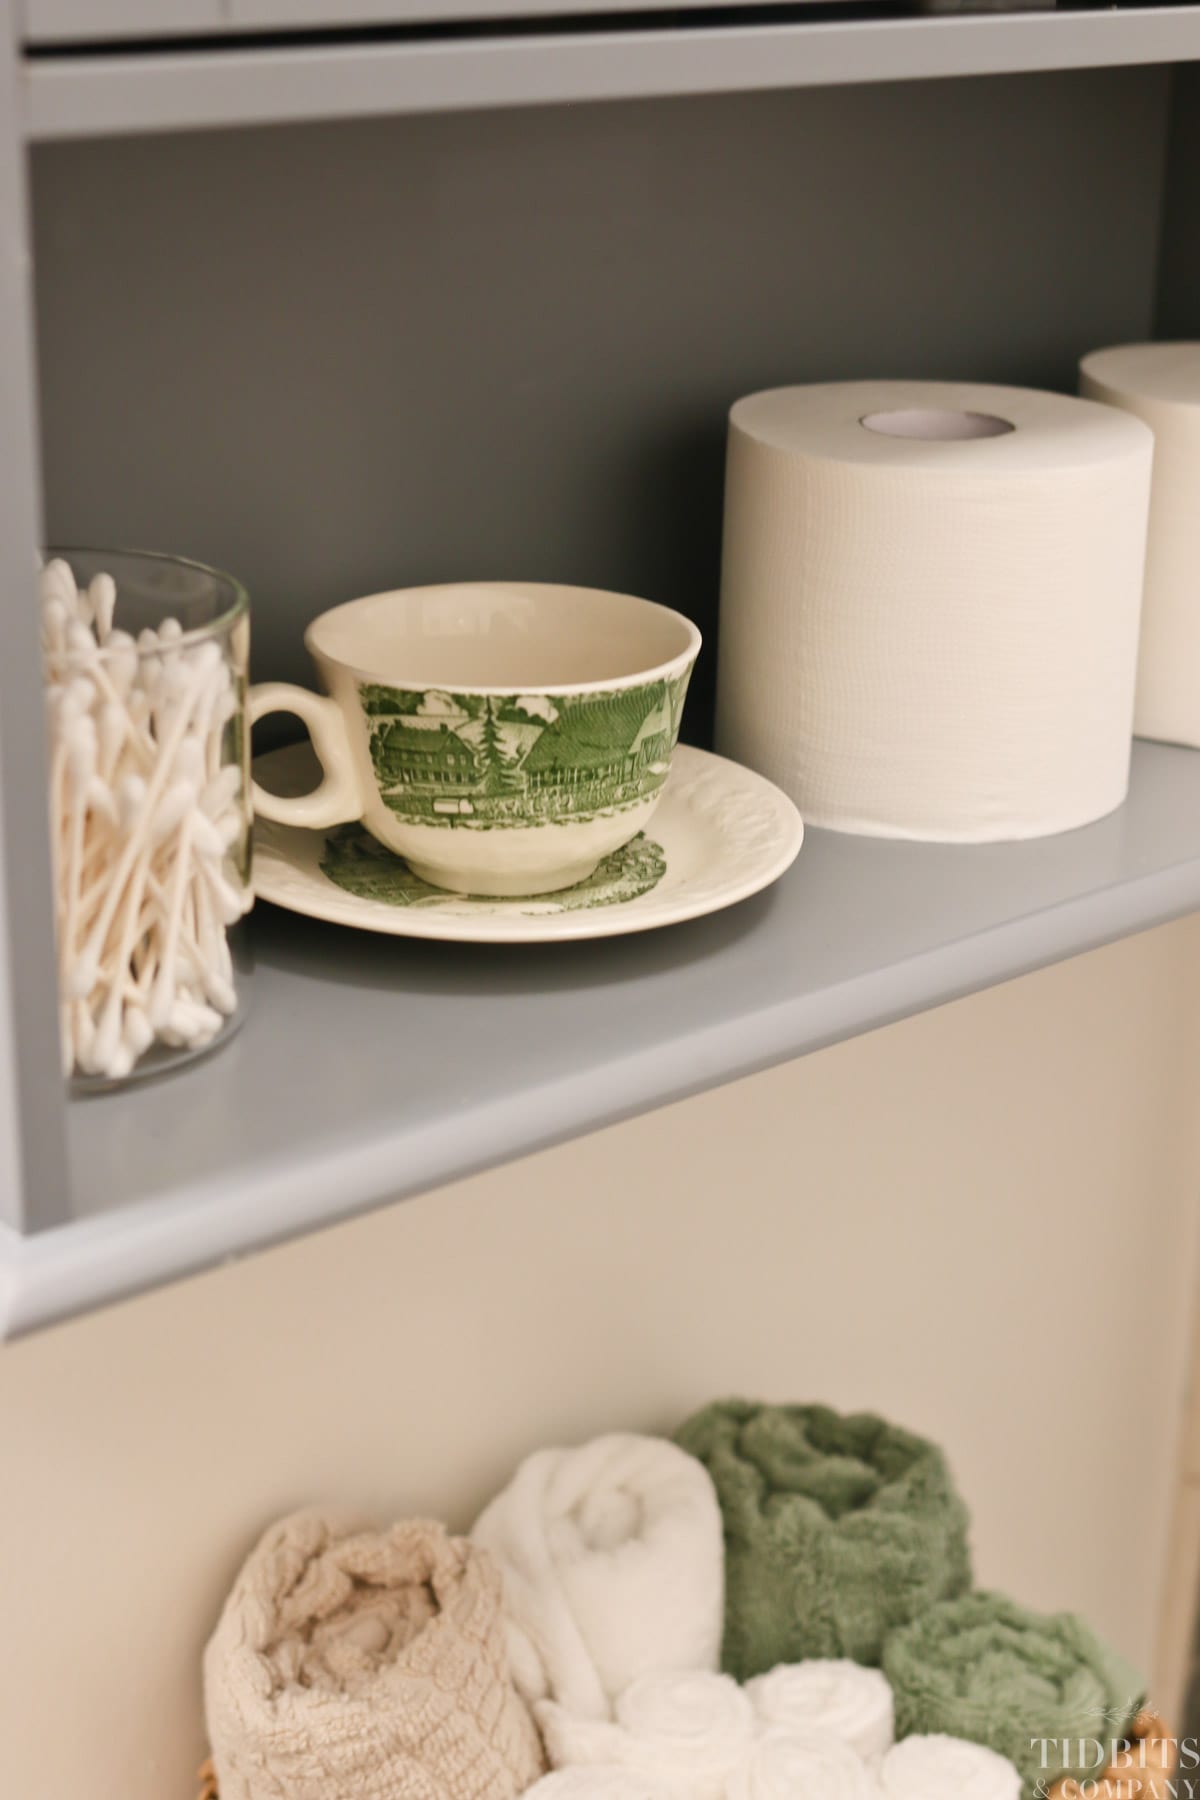 A tea cup, toilet paper and q tips on a bathroom shelf